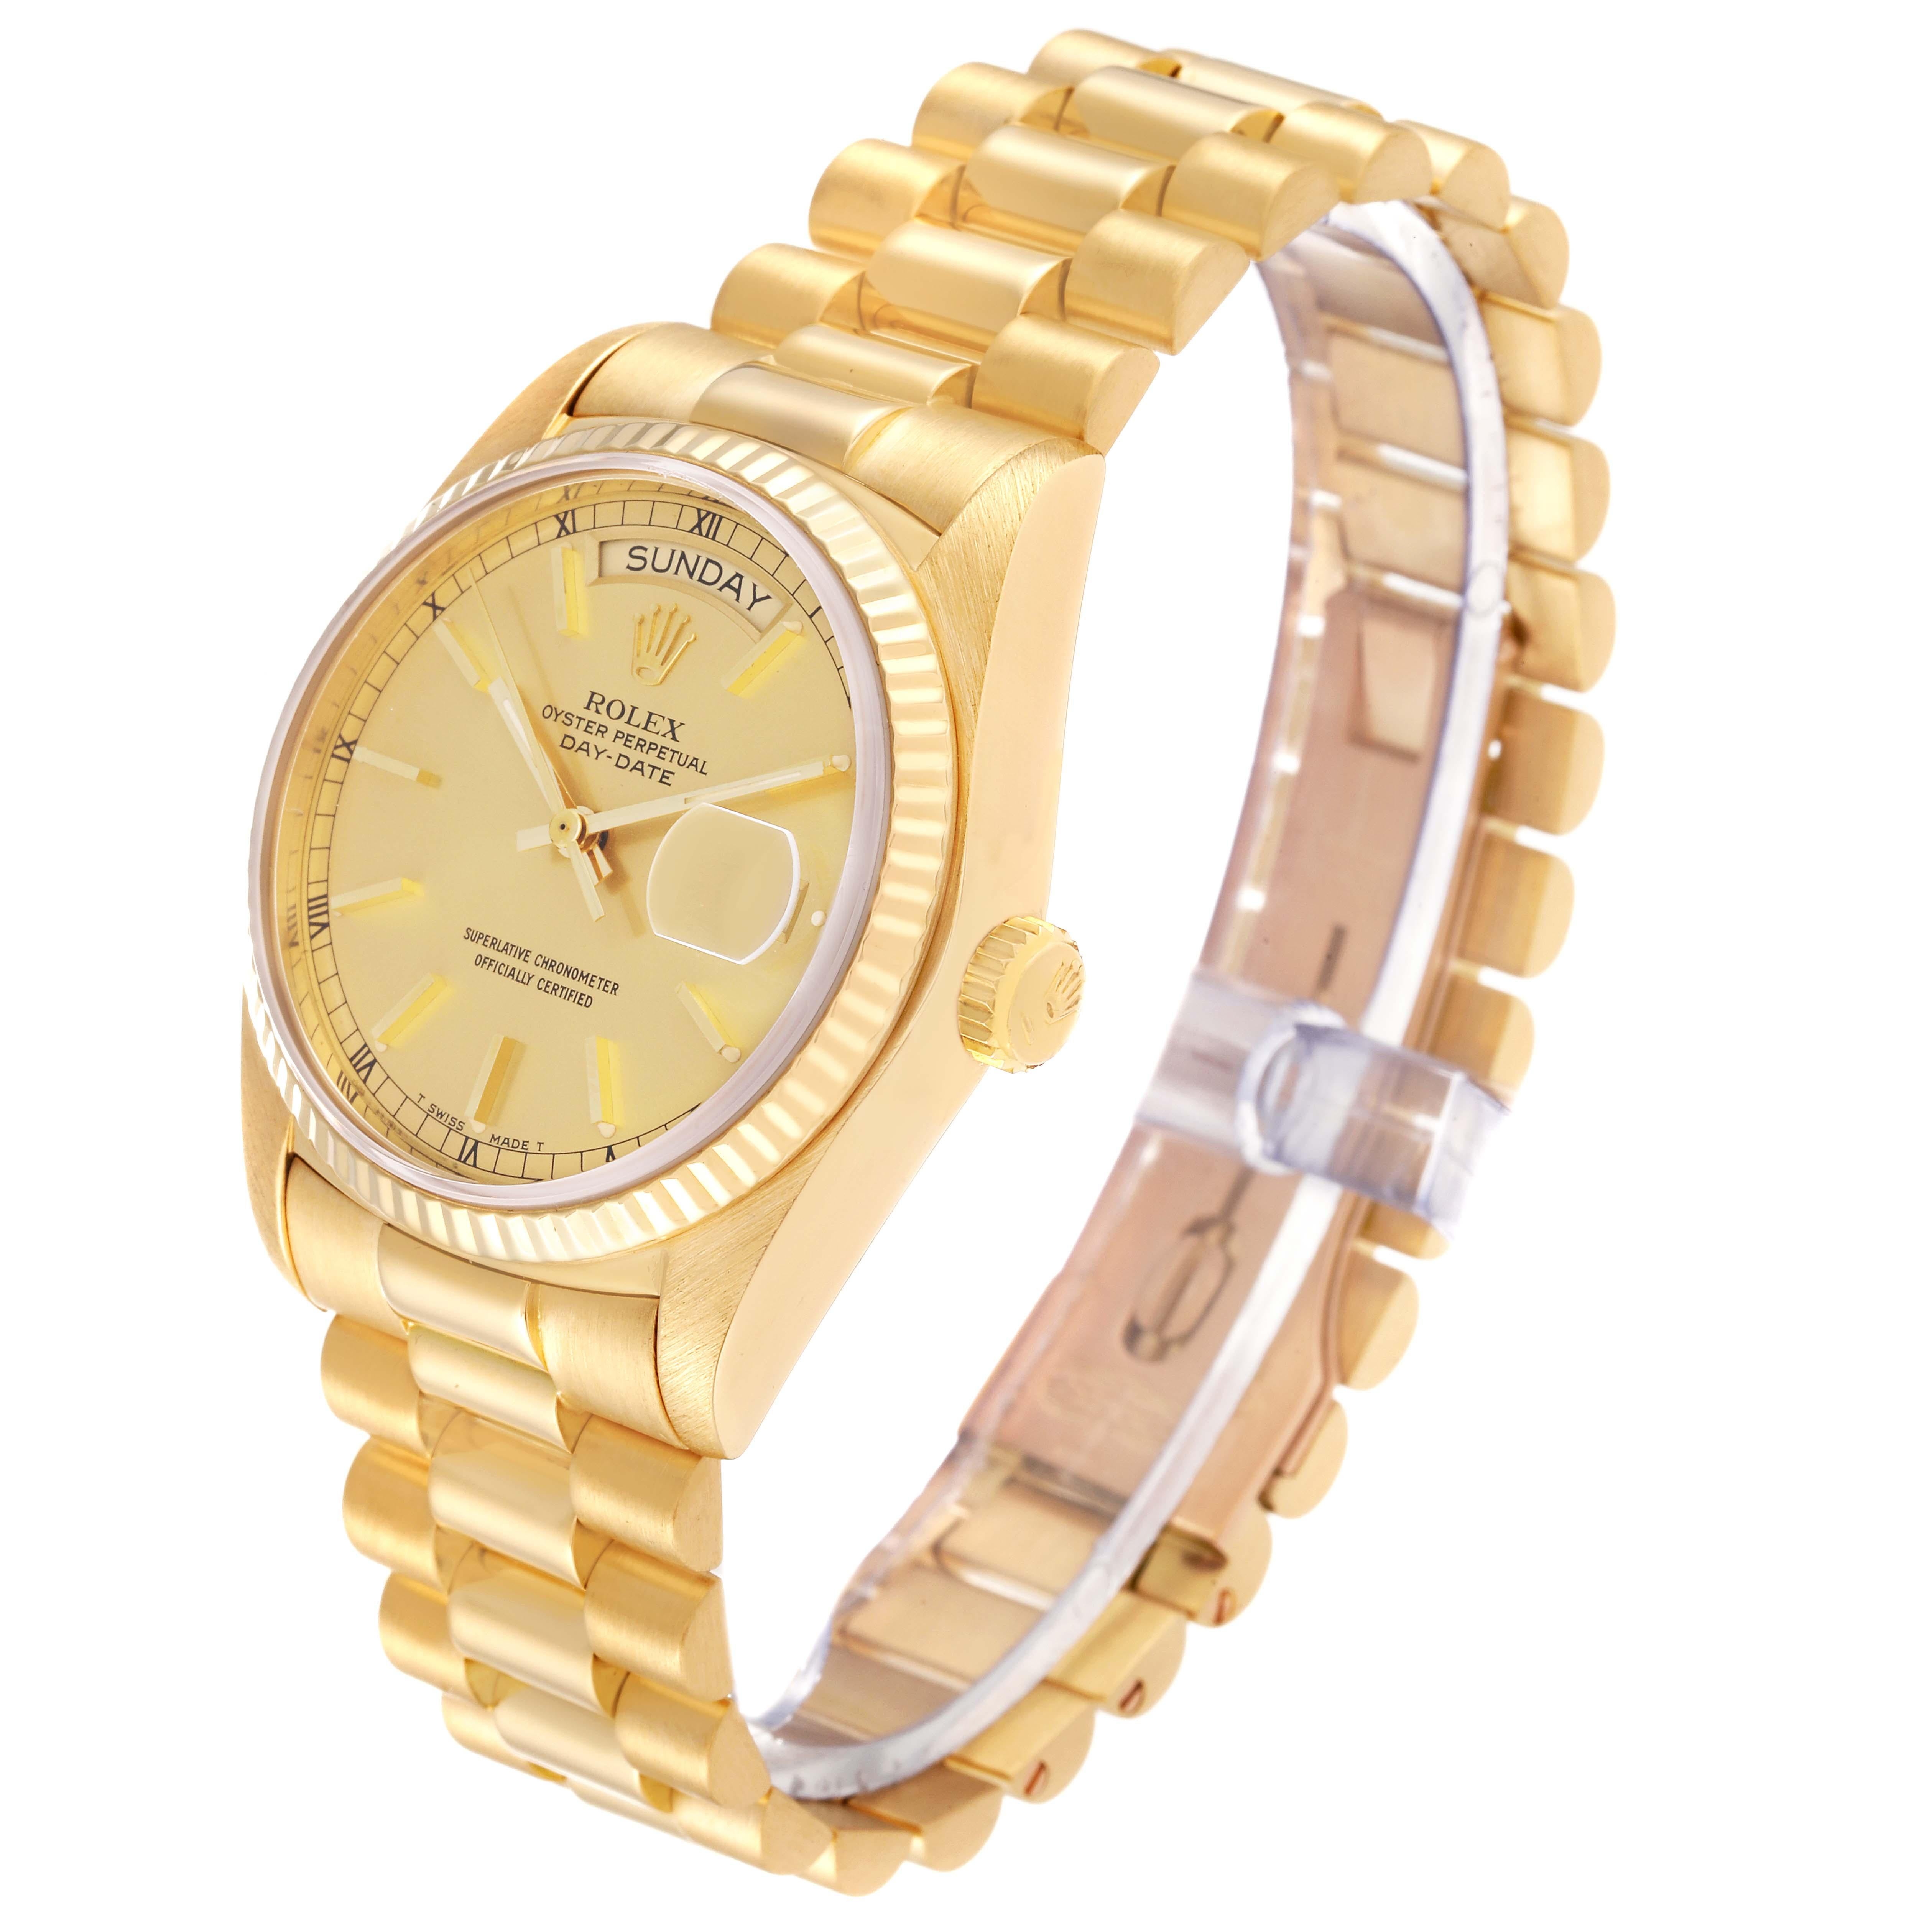 Men's Rolex President Day-Date Yellow Gold Champagne Dial Mens Watch 18038 Box Papers